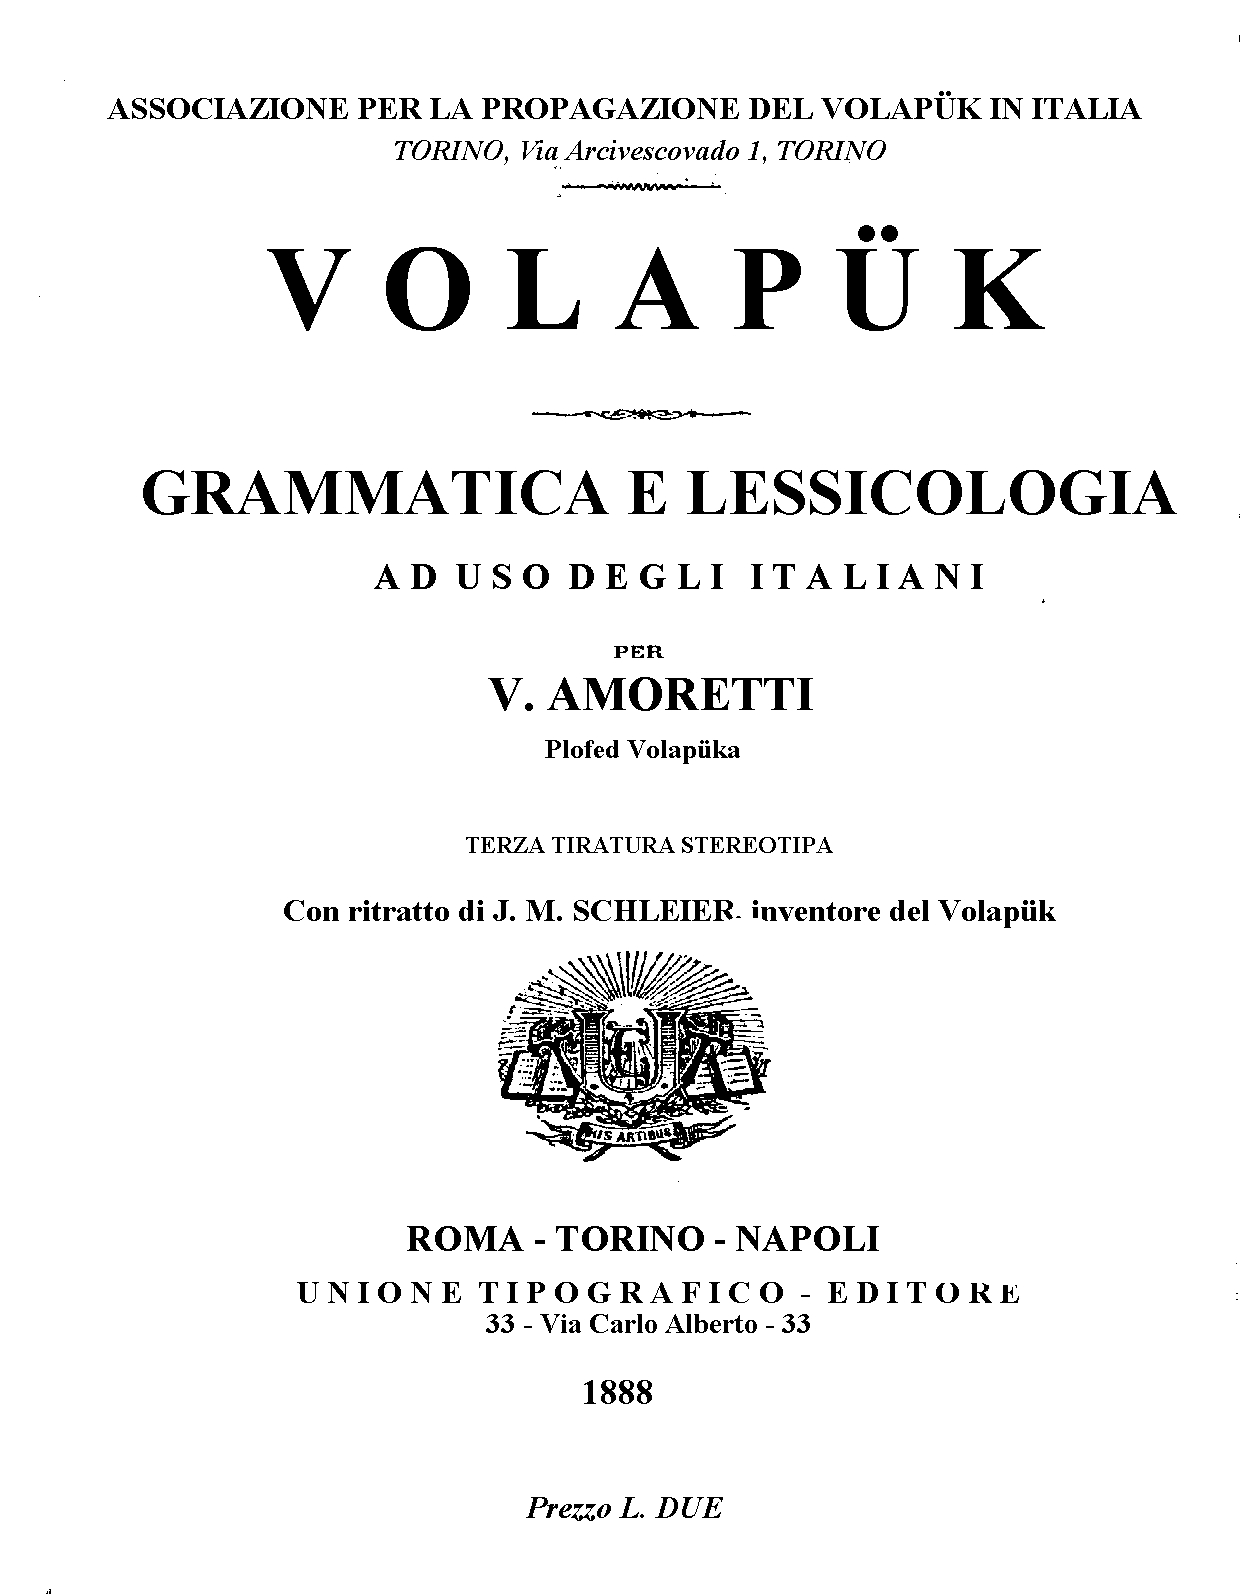 Title page of the Italian edition of the Volapük grammar